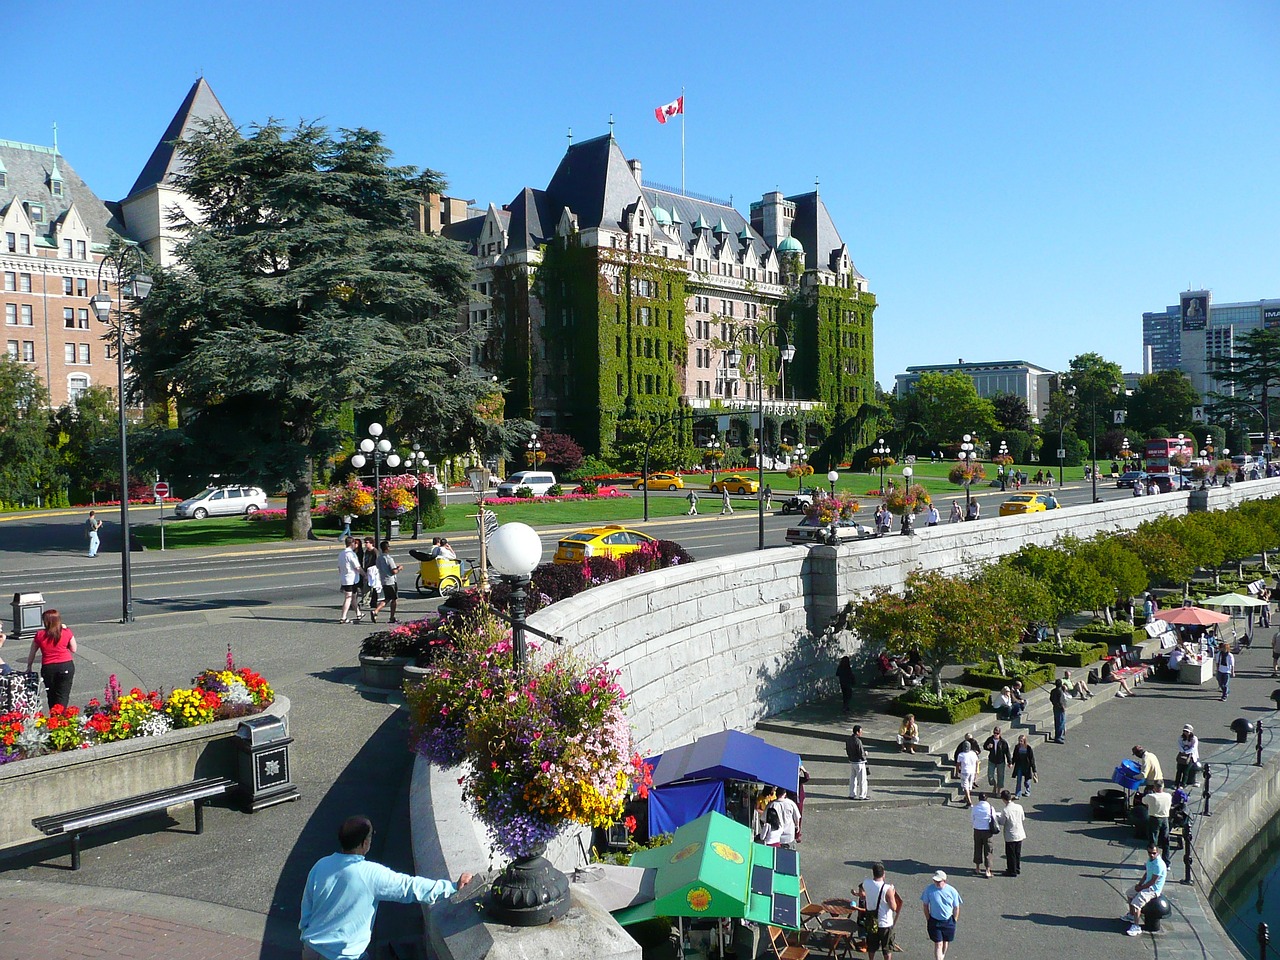 Corporate Stays Expands Luxury Housing Offerings in Victoria, Canada